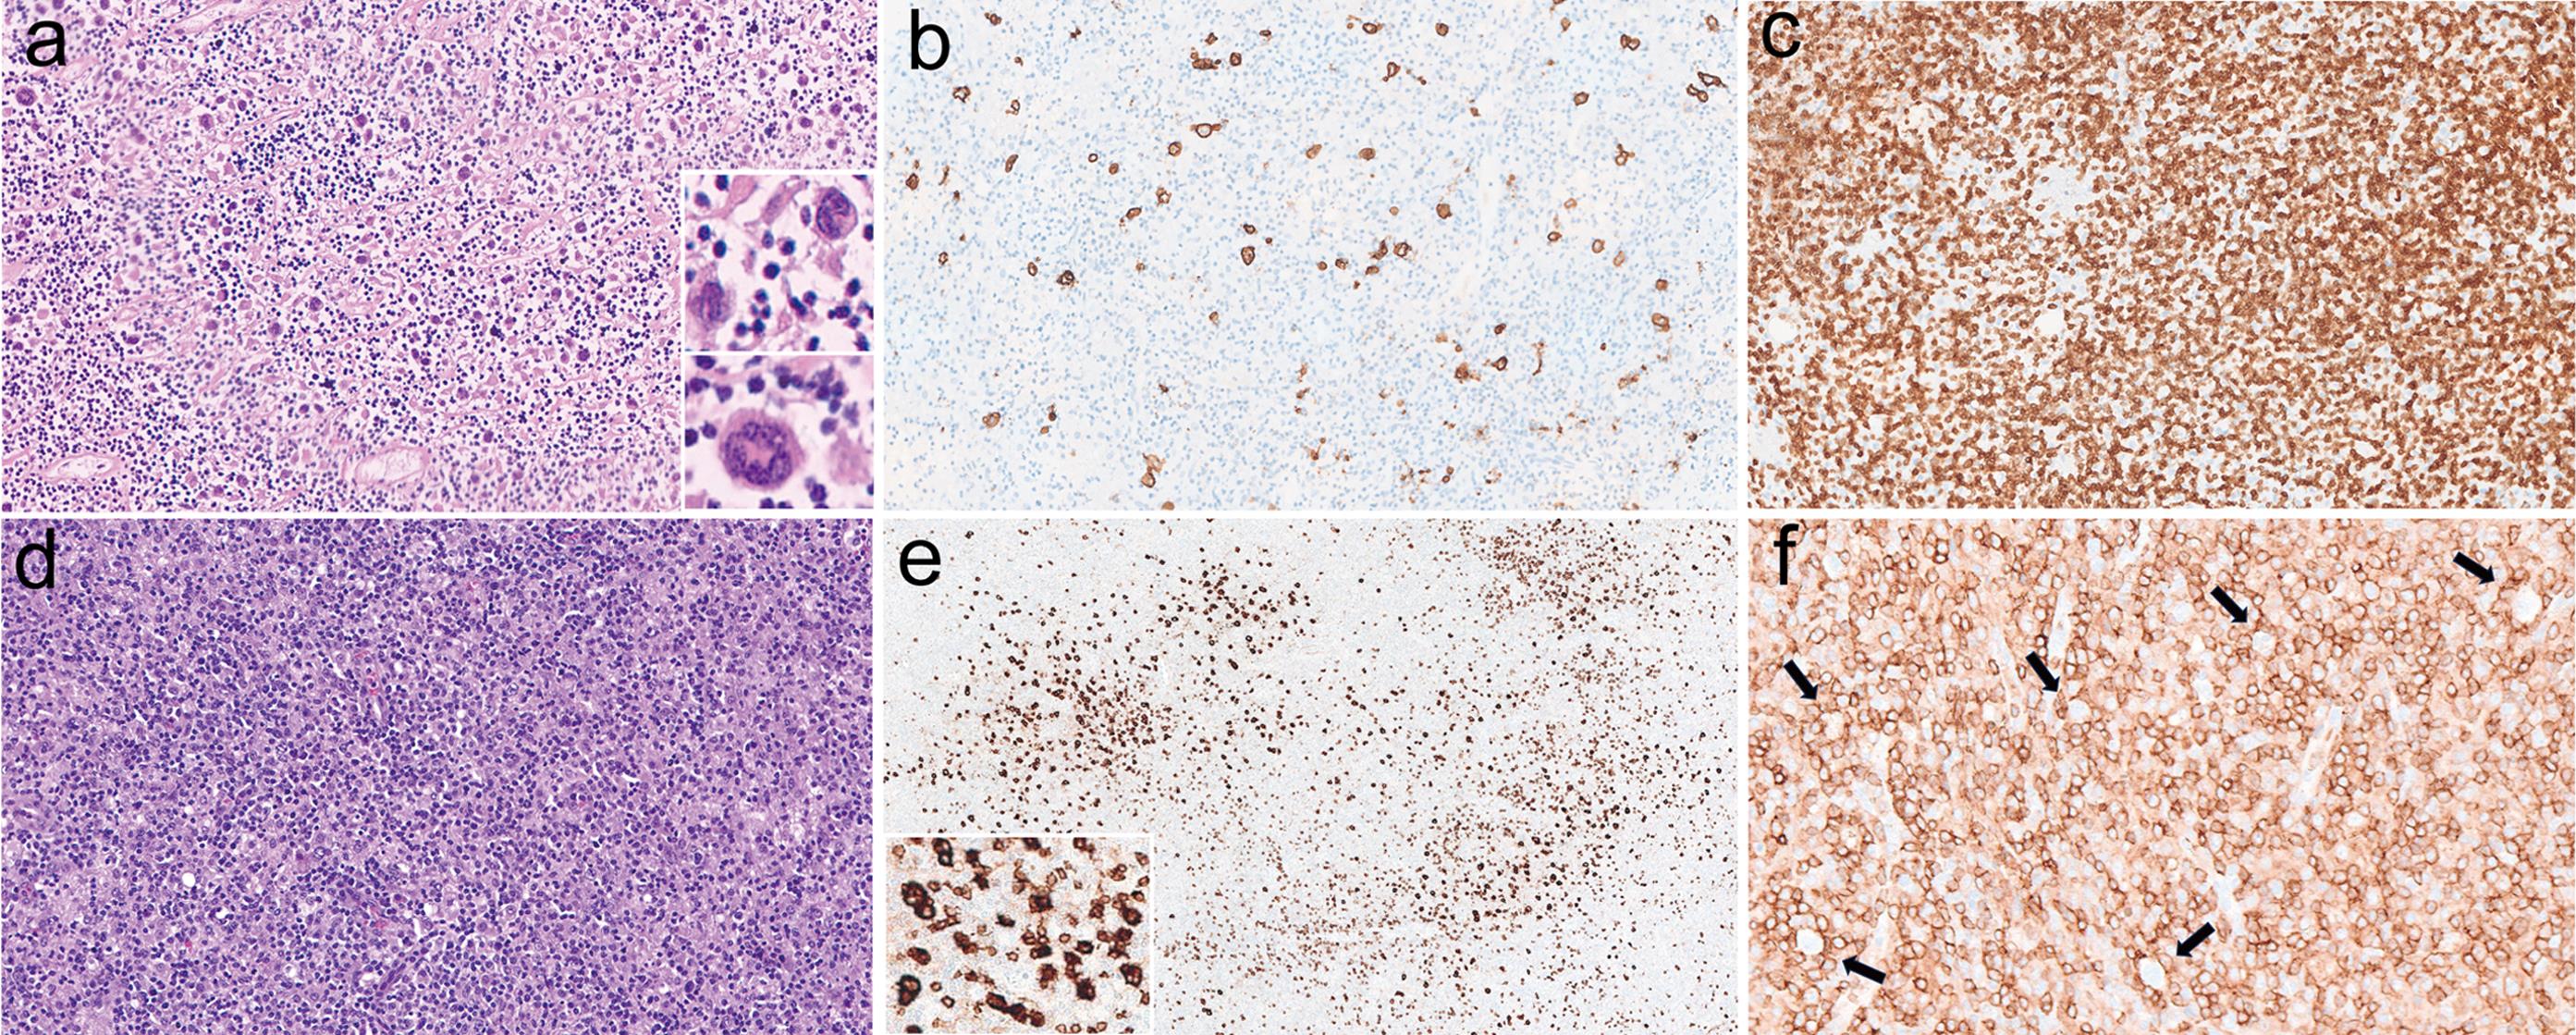 The histologic and immunohistochemical features of THRLBL vs. NLP Fan pattern E.